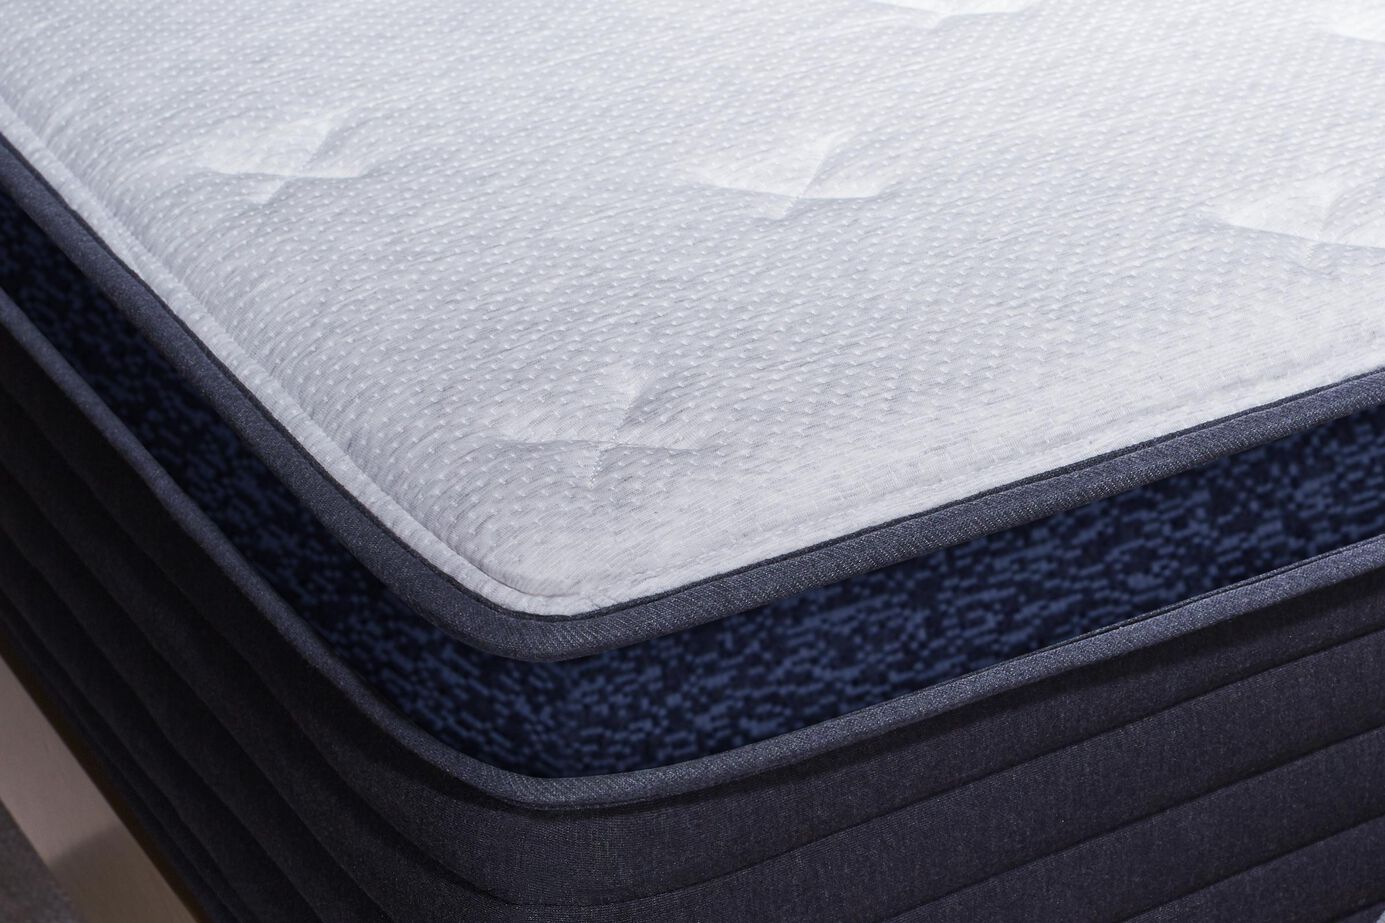 Shop the Helix Midnight Luxe  Premium Mattress with Pressure